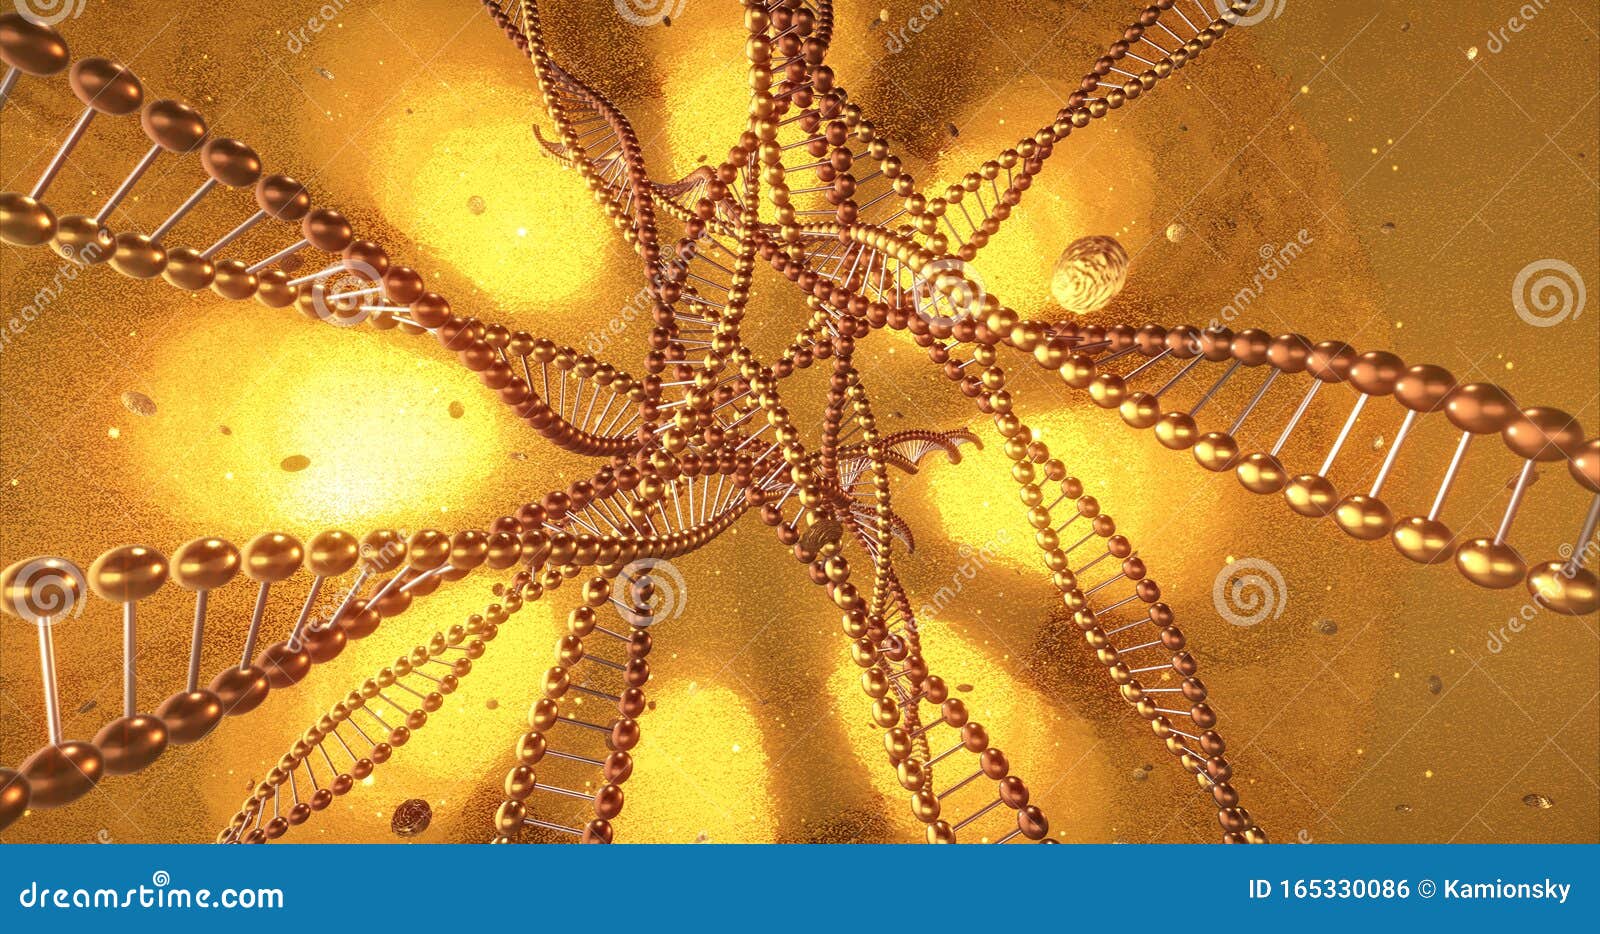 Golden Geometric Background with Swirls of DNA Molecules. 3D Rendering  Stock Illustration - Illustration of backdrop, health: 165330086